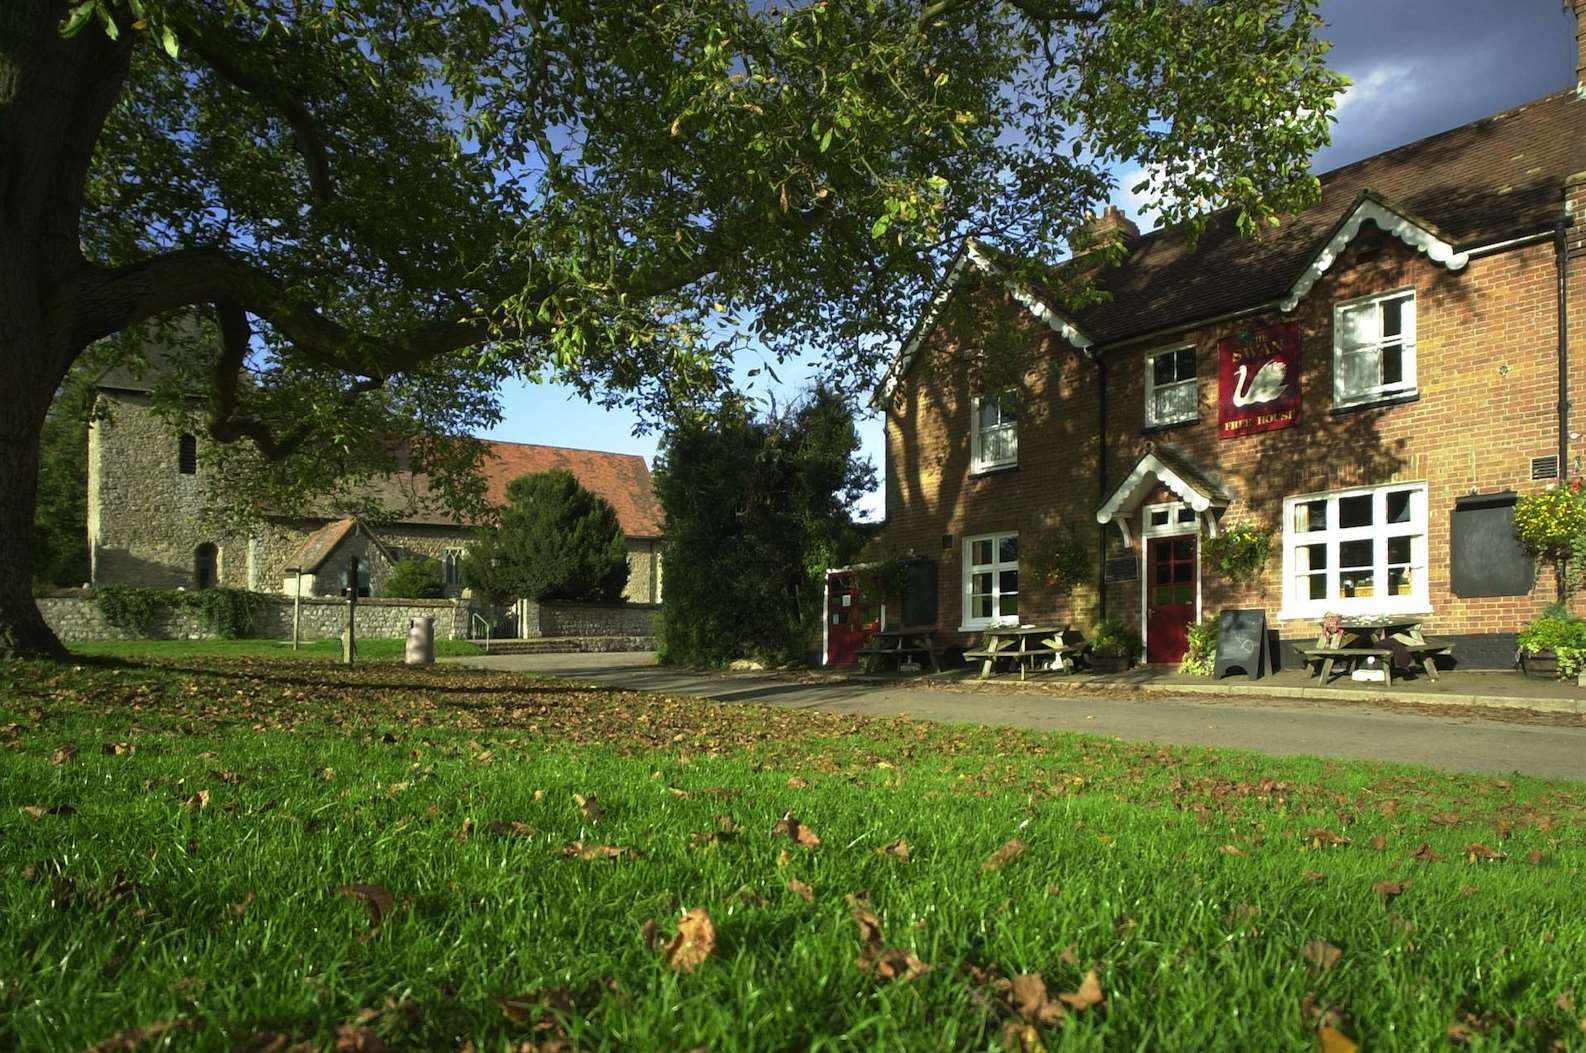 The Swan On The Green is the ideal family pub on a summer's day